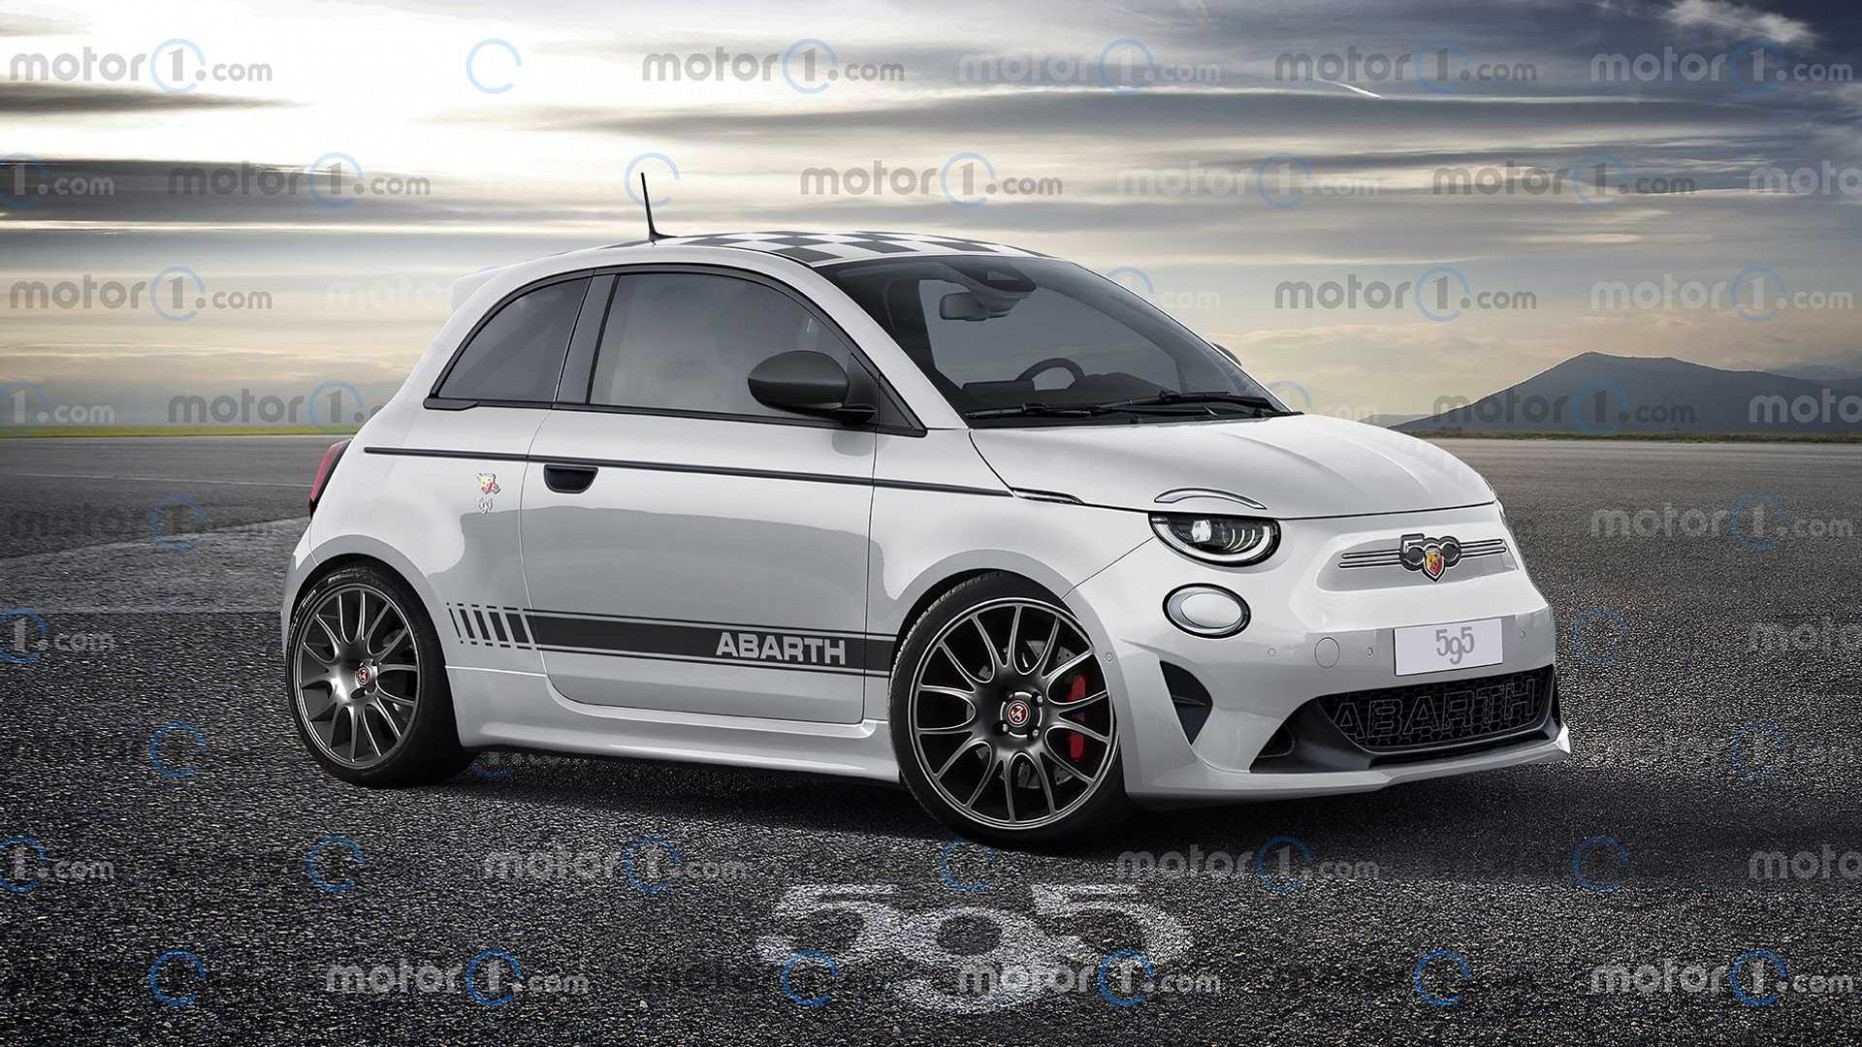 New Model and Performance 2023 Fiat 500 Abarth